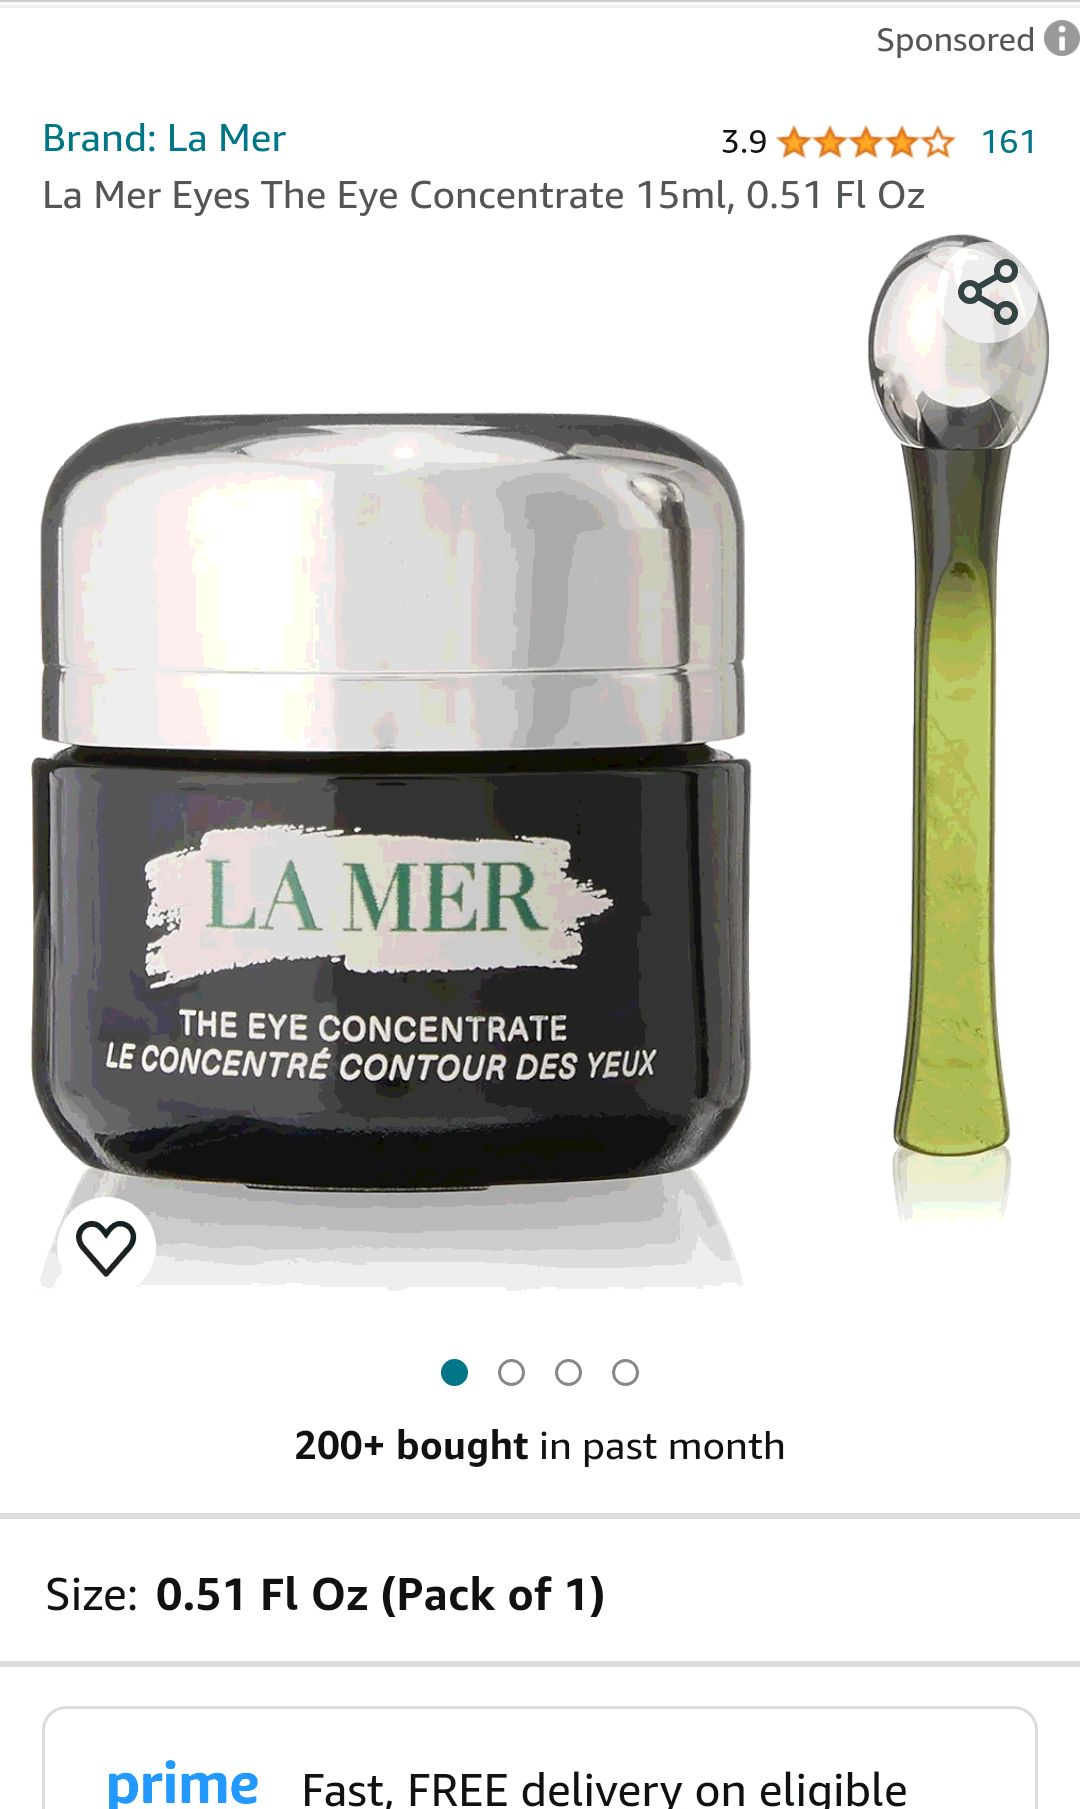 La Mer Eyes The Eye Concentrate 15ml, 0.51 Fl Oz : Beauty & Personal Care